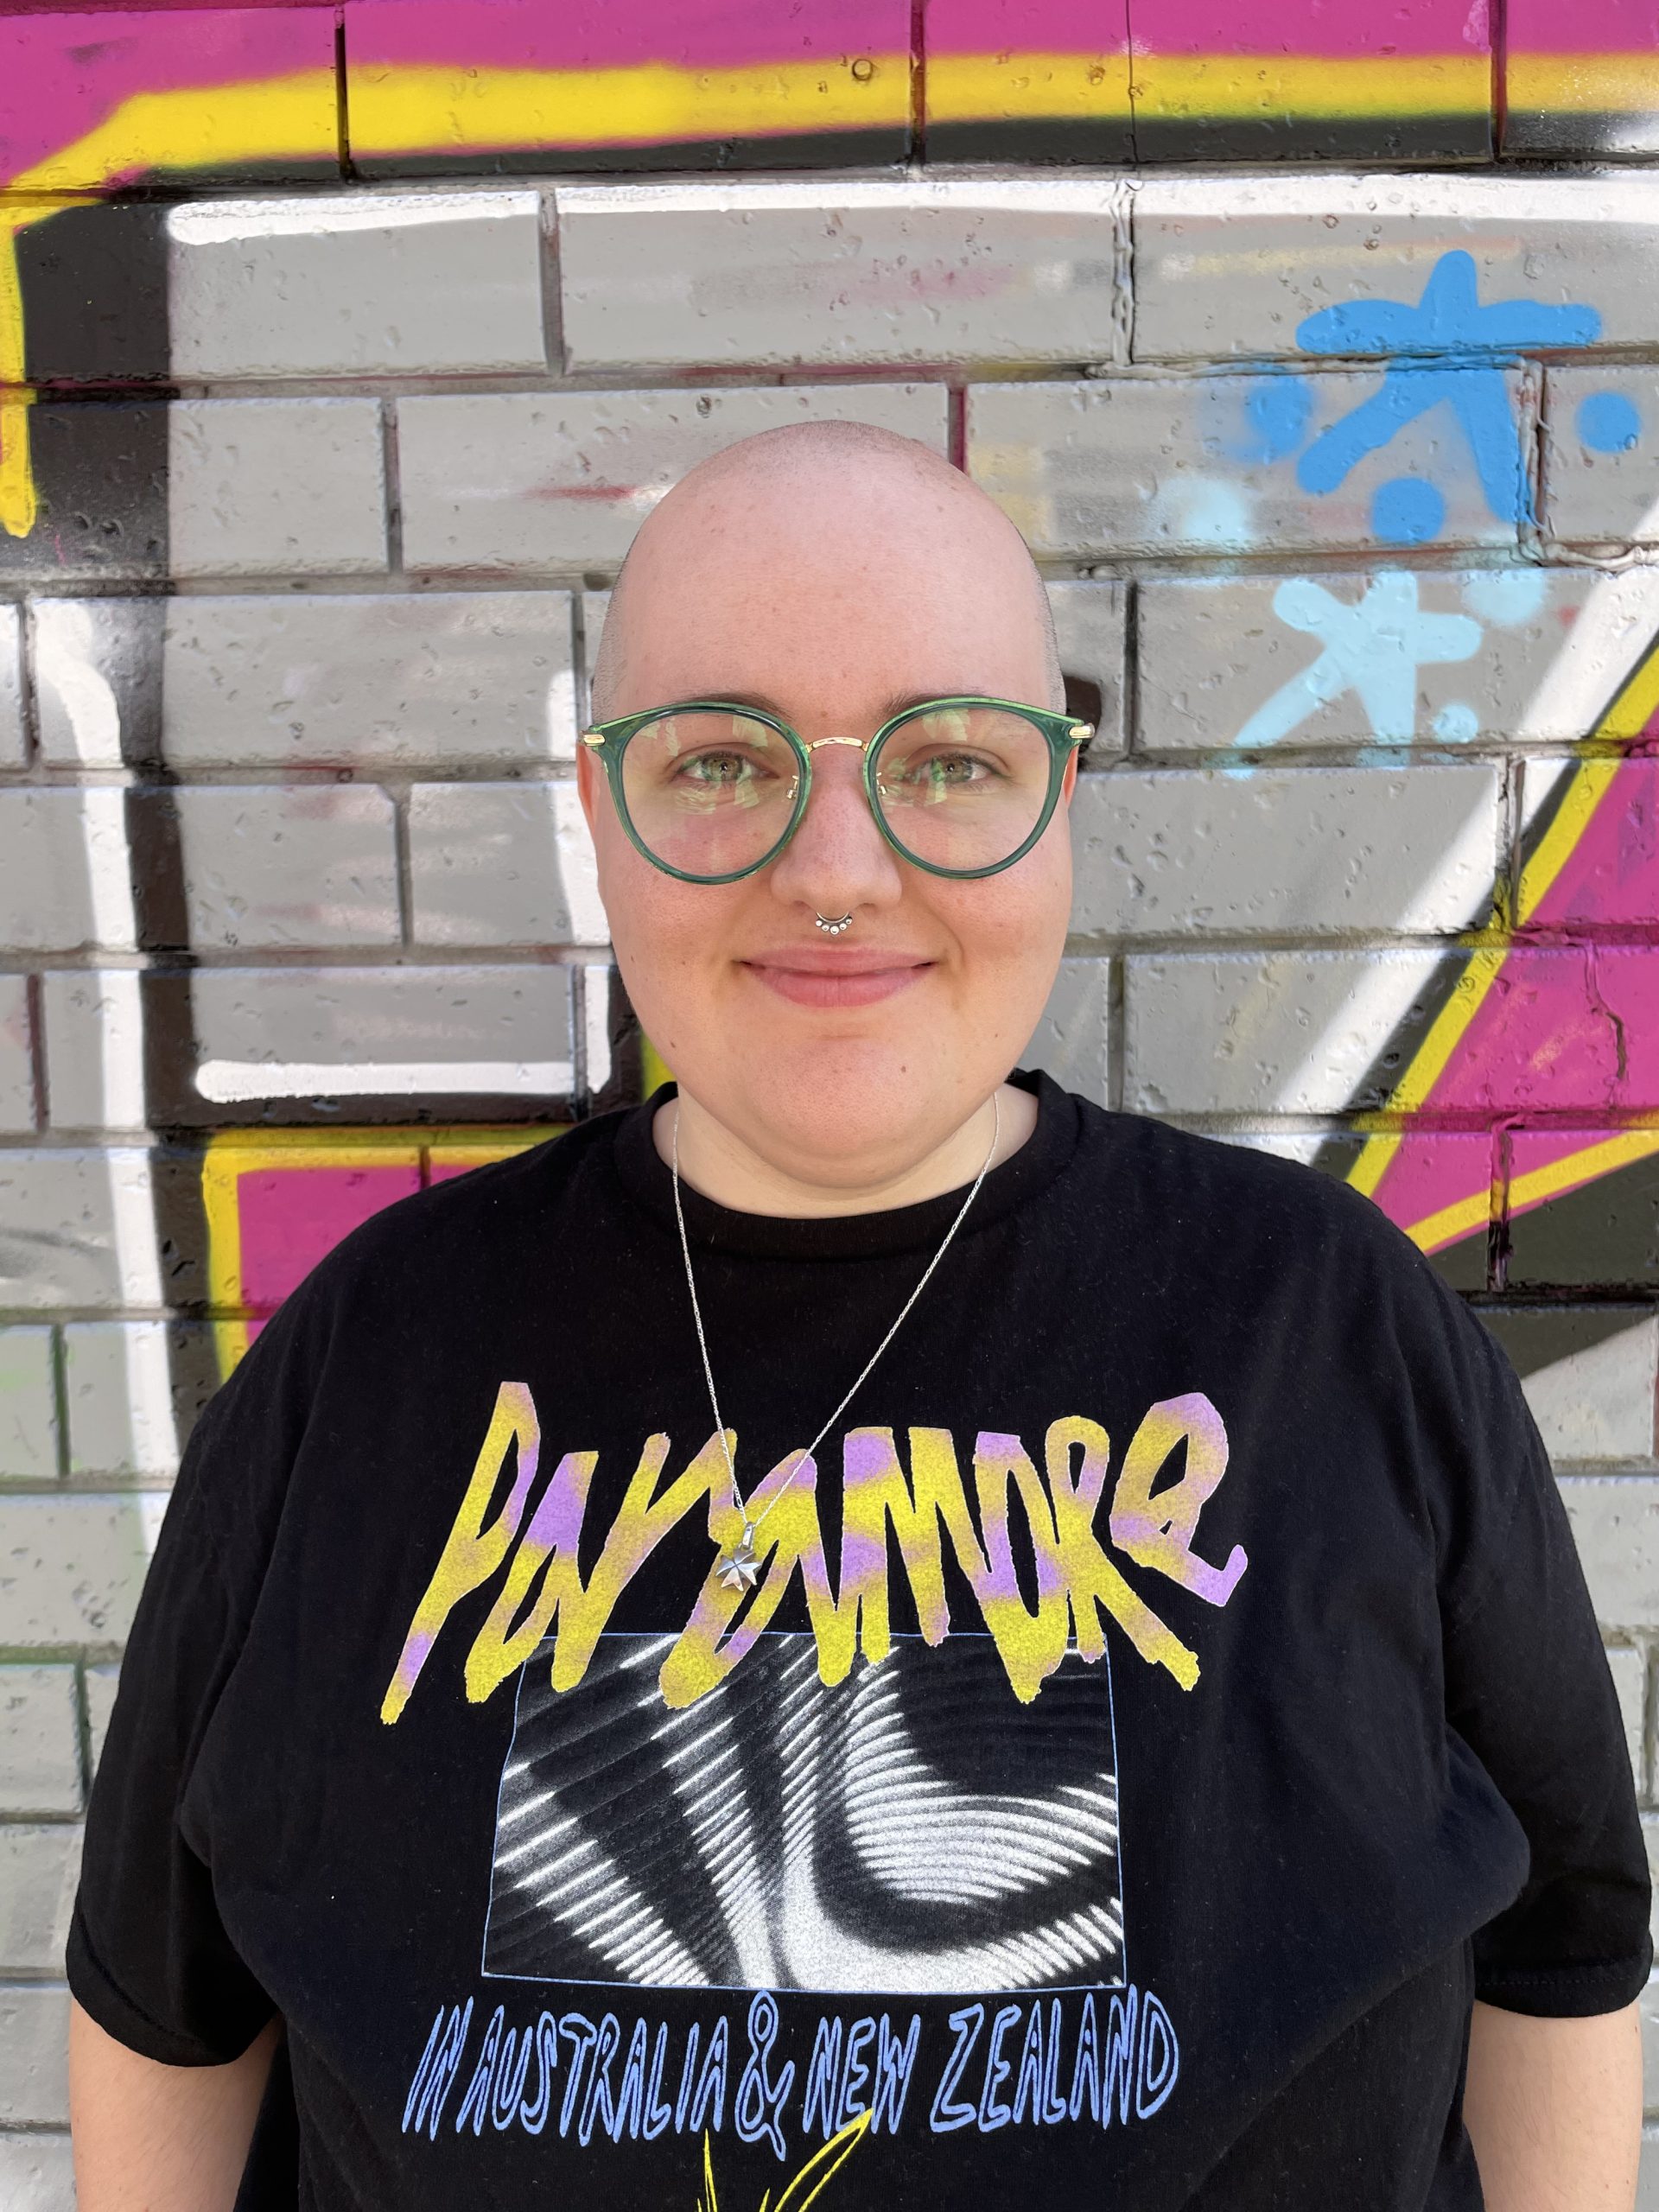 Staff member Jay standing in front of a wall of street art smiling, wearing green glasses and a band tee shirt.